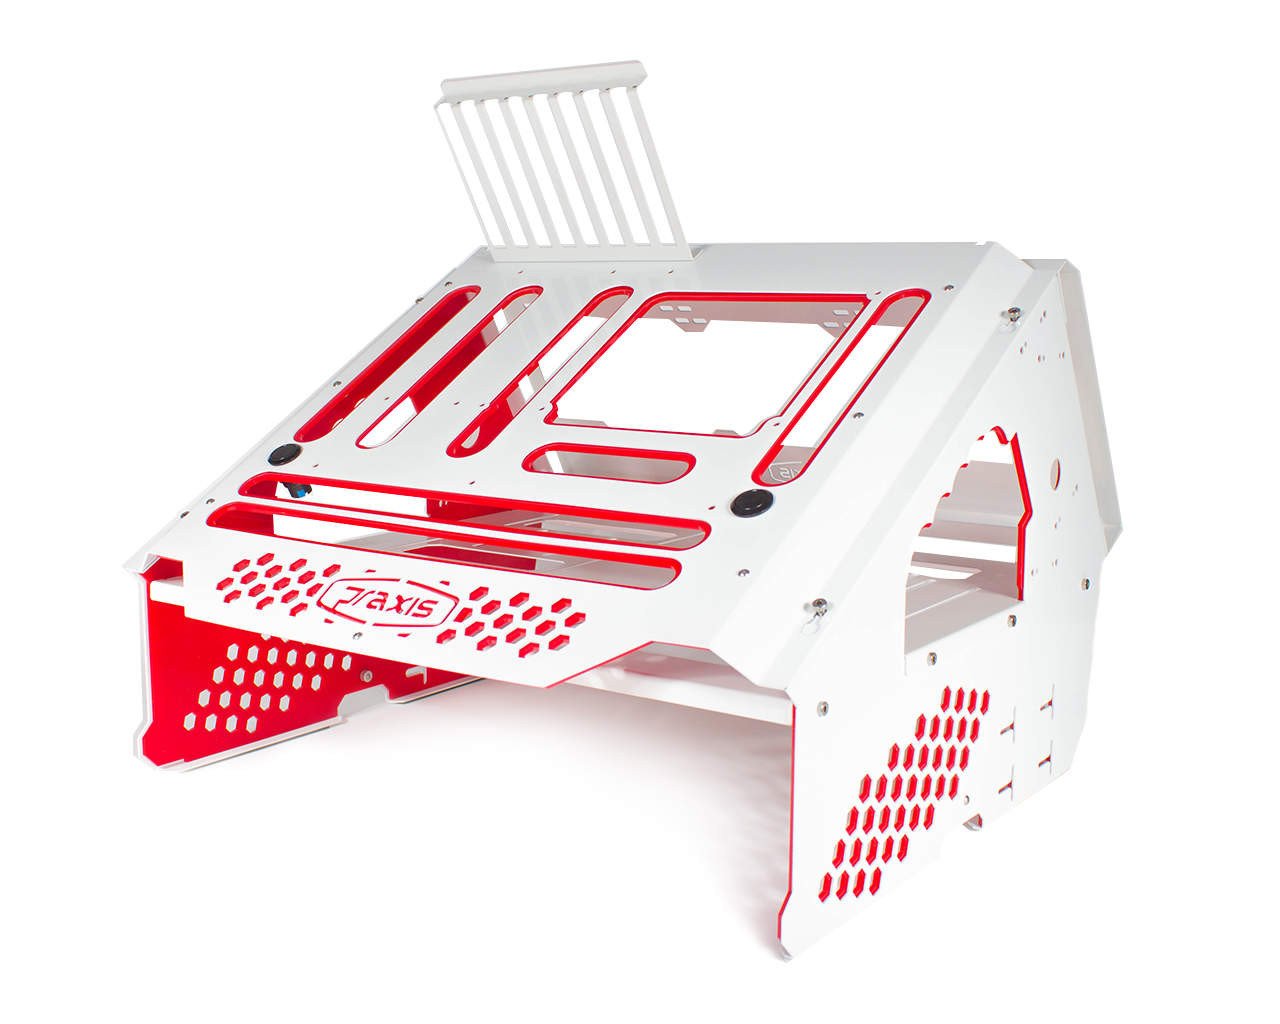 PrimoChill's Praxis Wetbench Powdercoated Steel Modular Open Air Computer Test Bench for Watercooling or Air Cooled Components - PrimoChill - KEEPING IT COOL White w/Solid Red Accents